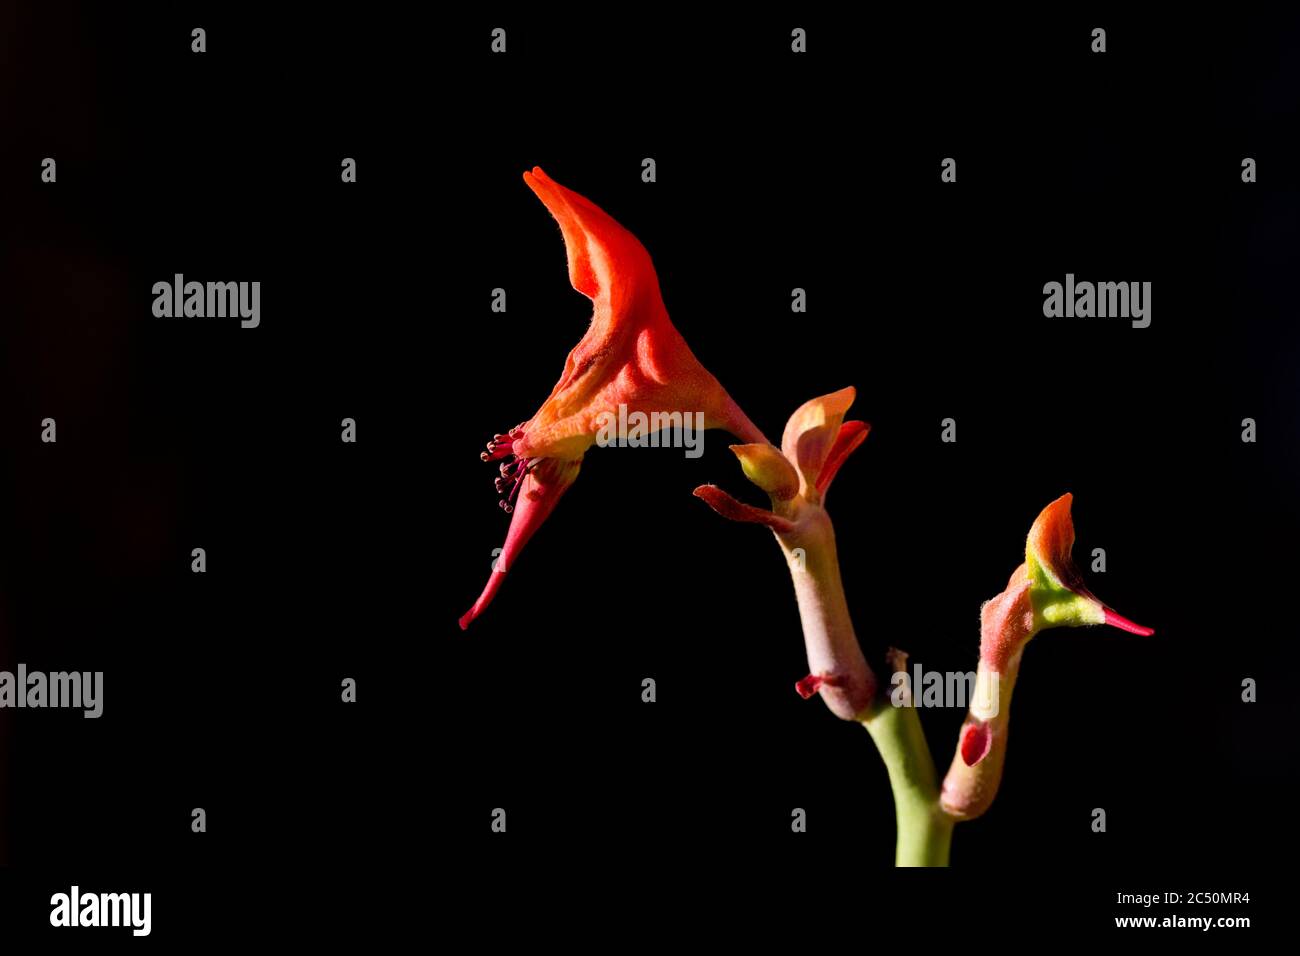 Lady slipper blossoms resemble an elegant shoe.  Plant is a succulent with orange red flowers.  Copy space on black background. Stock Photo